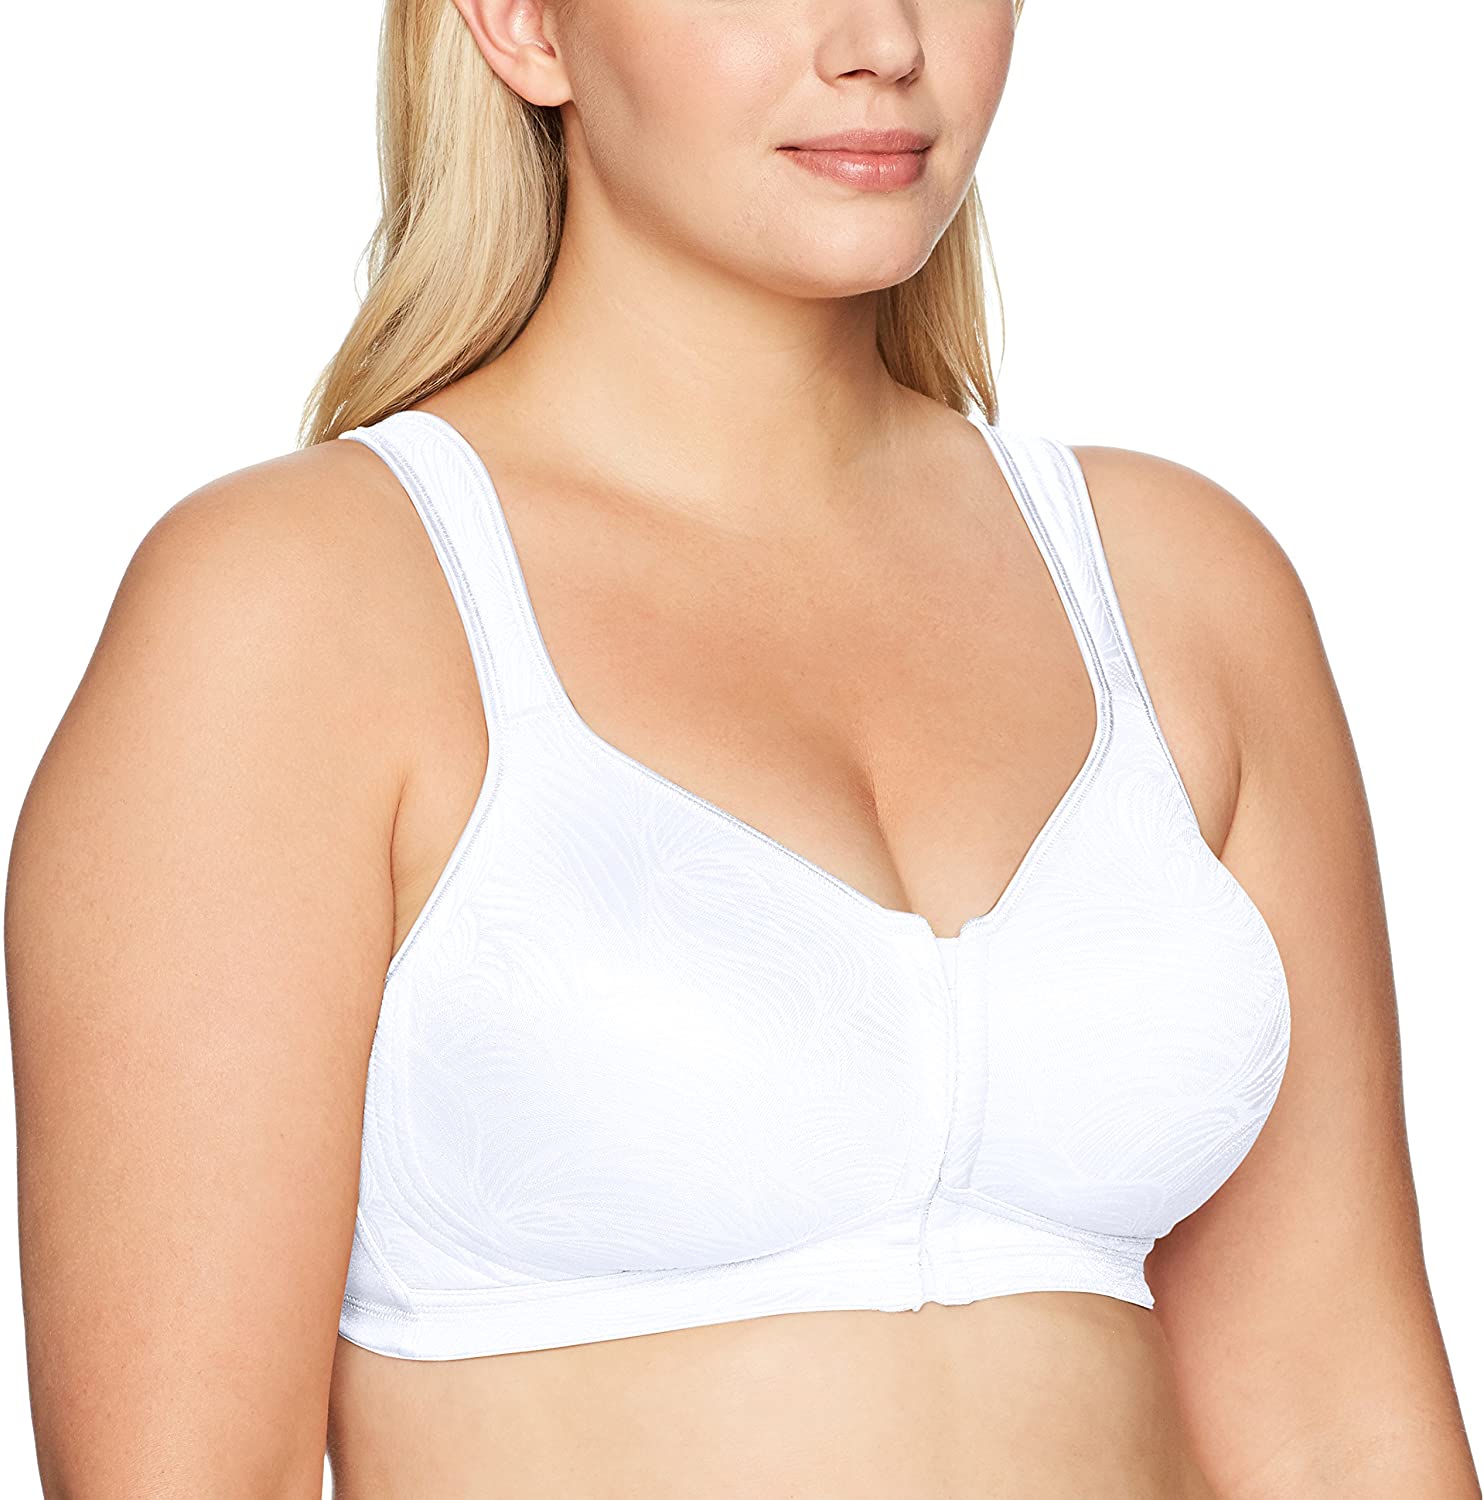 Playtex Women's 18 Hour Extra Back Support Front Close Wireless